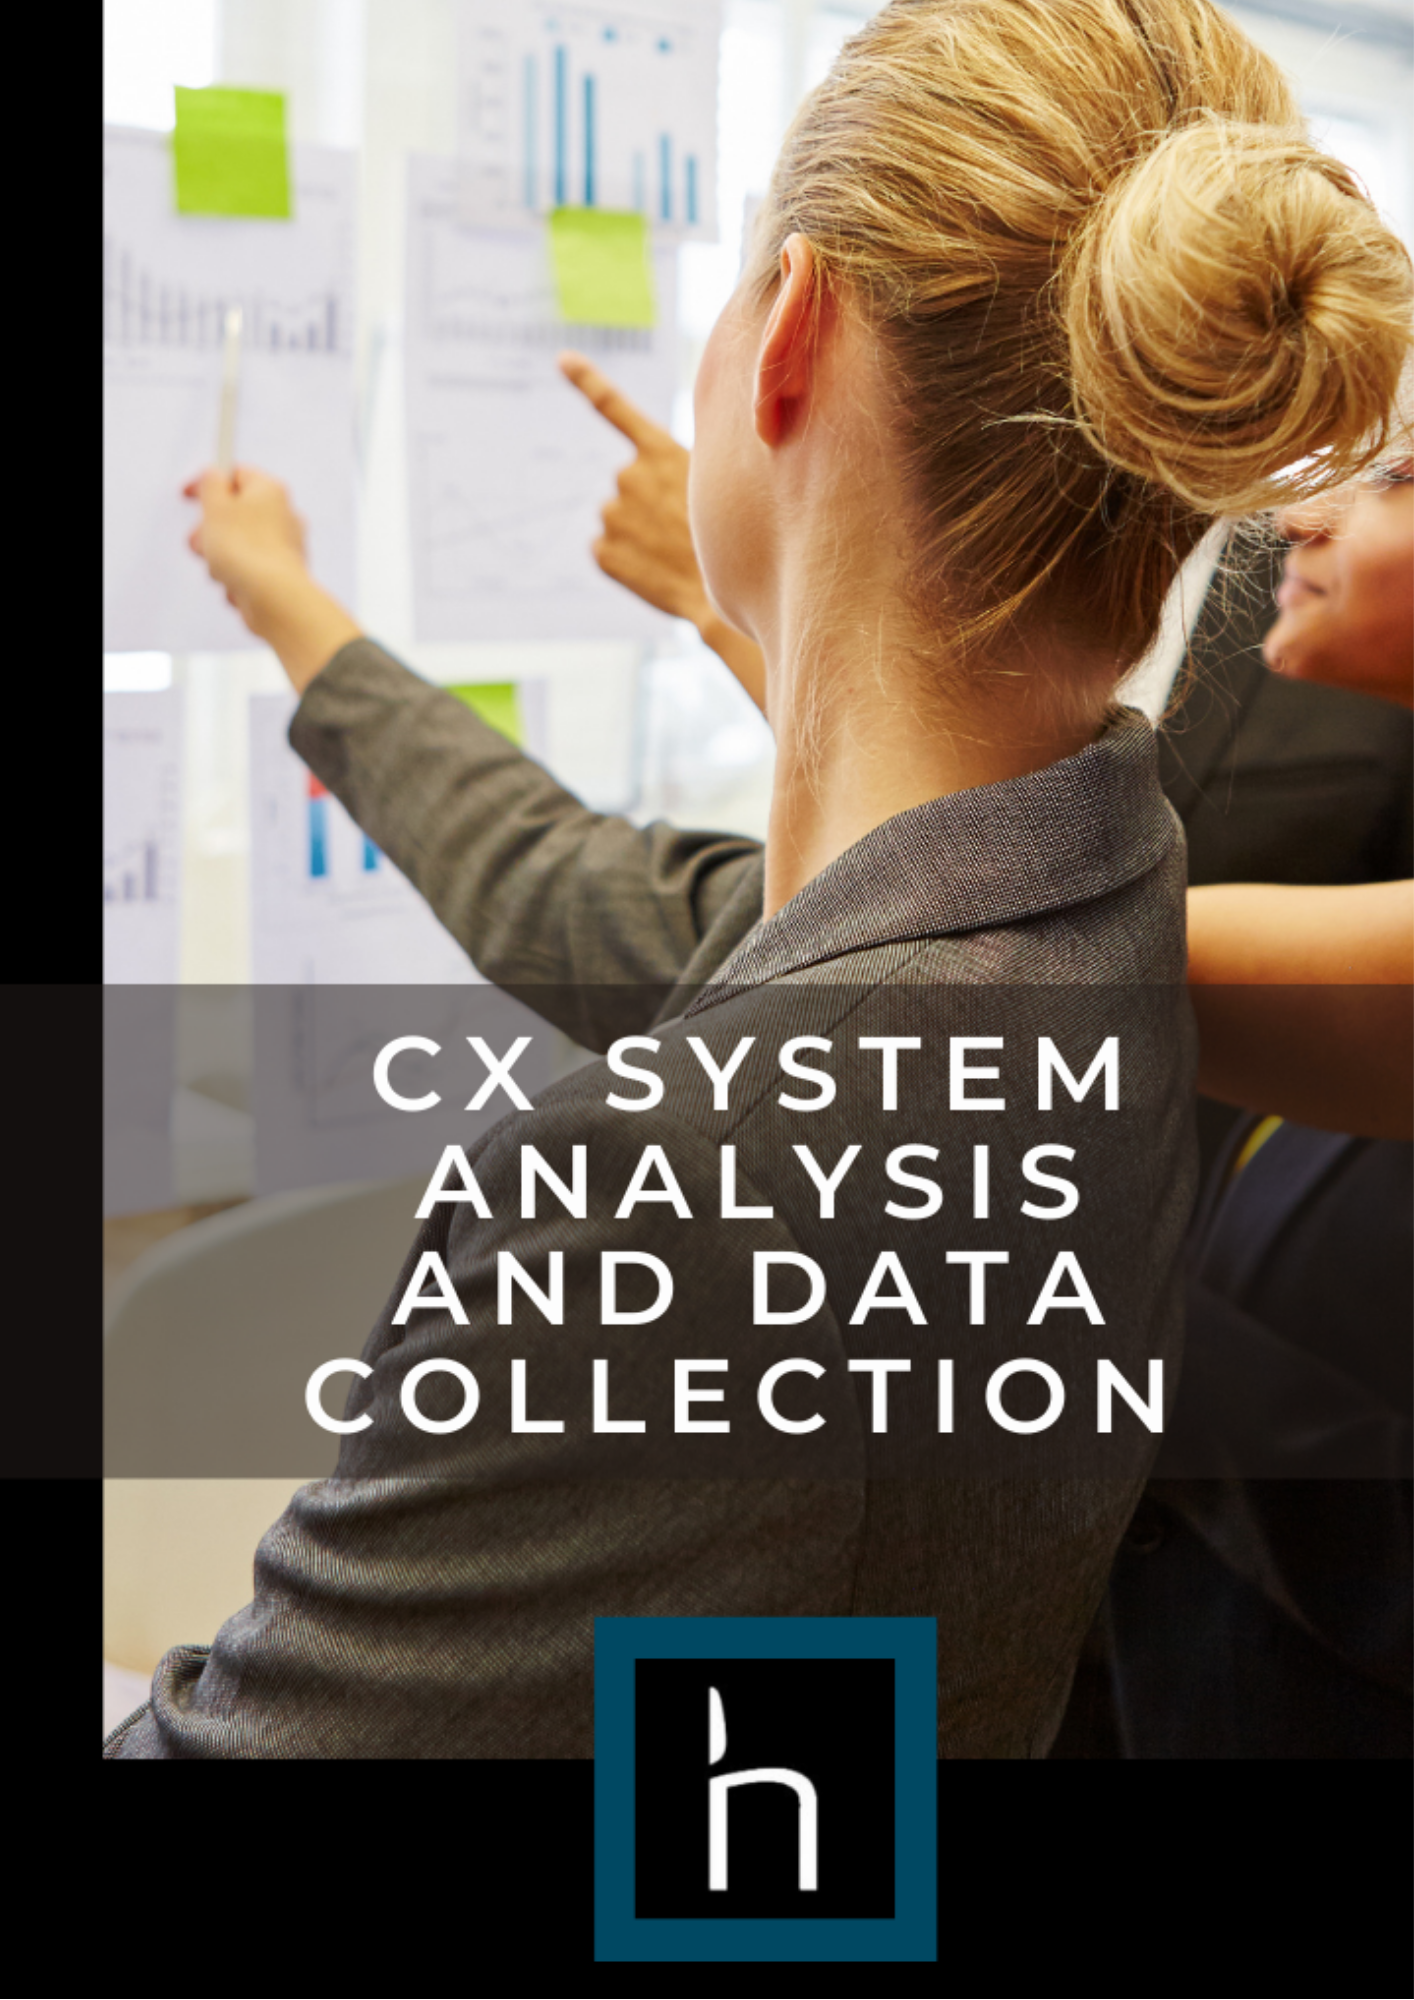 Blackchair - Brochures - CX system analysis and data collection